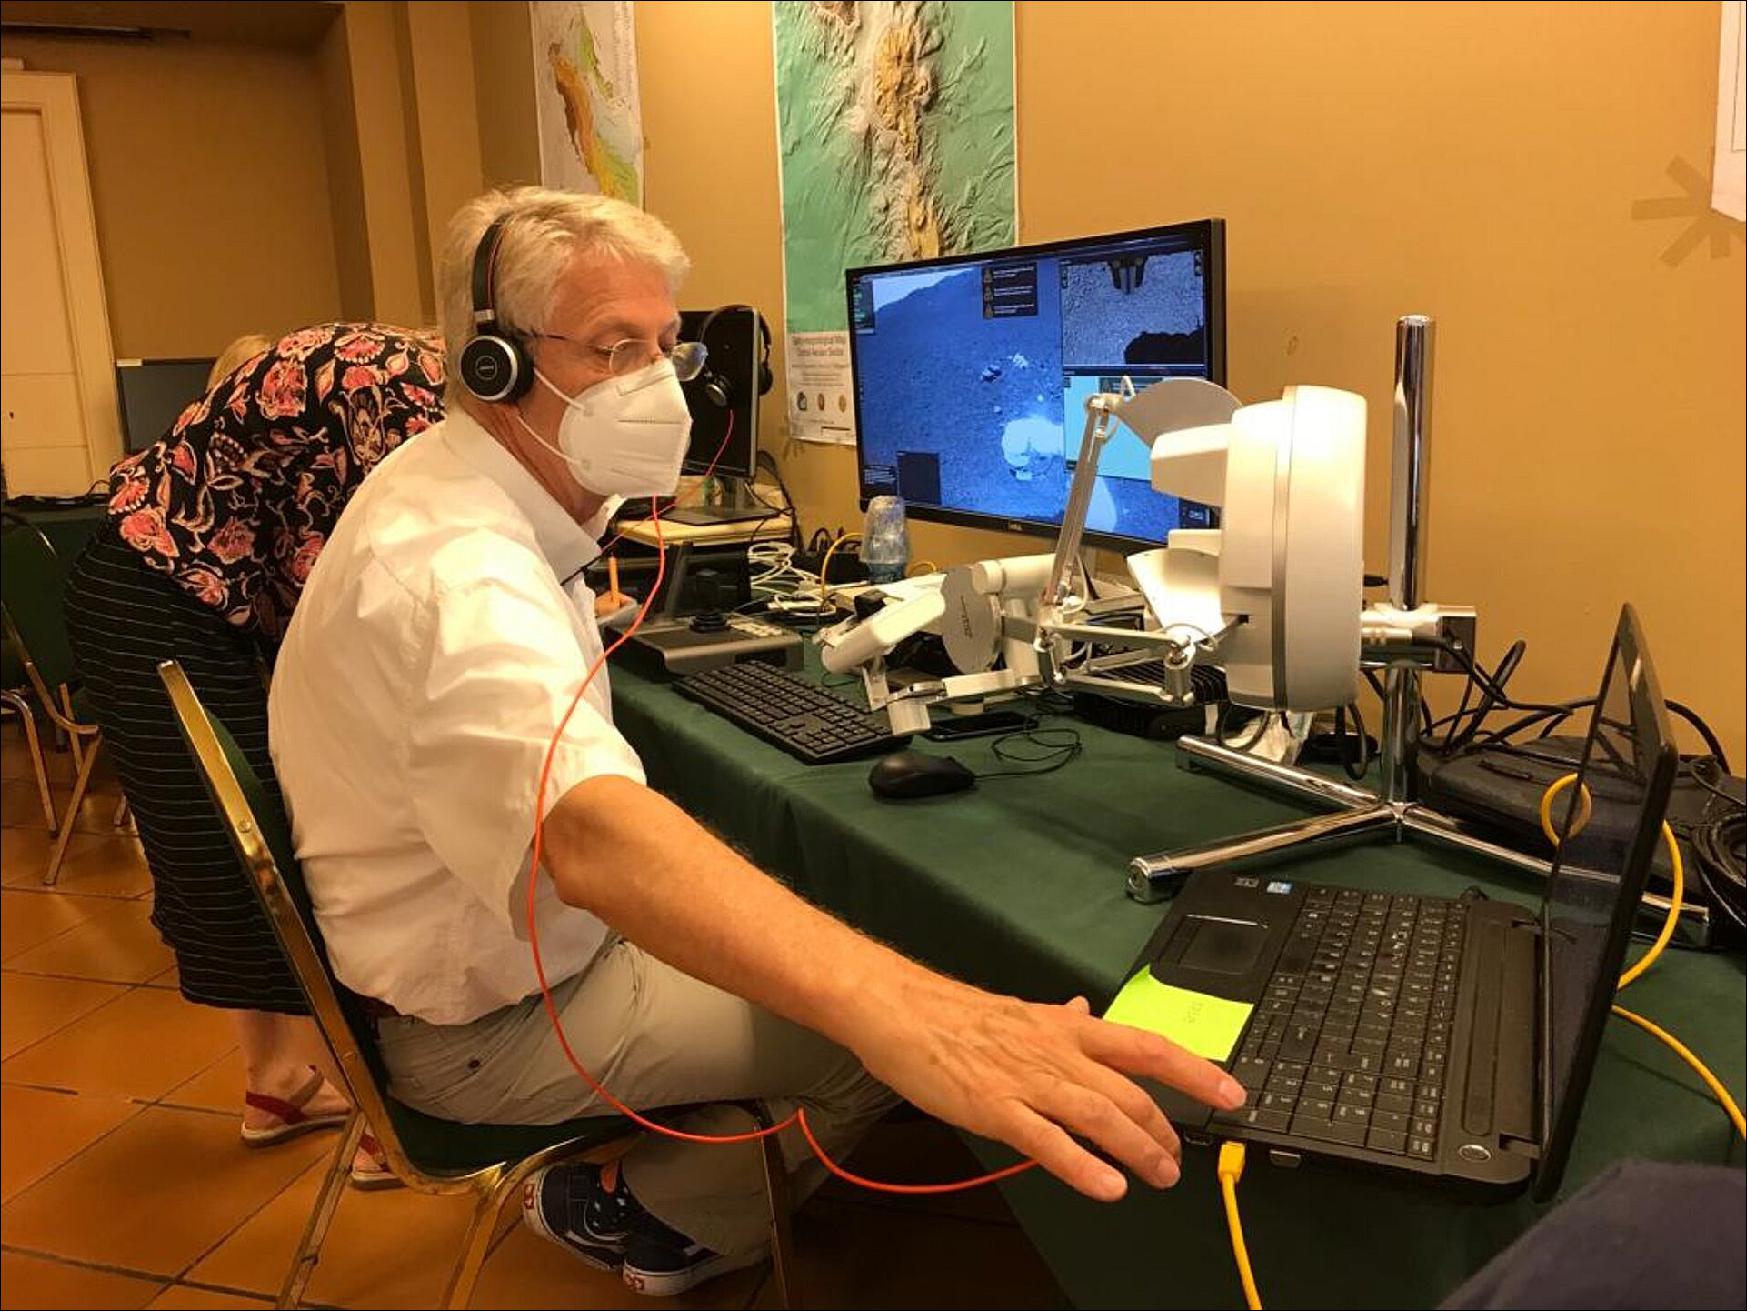 Figure 7: ESA astronaut Thomas Reiter controlled the Interact rover from a hotel room in Catania, Sicily, some 23 km and 2,600 m altitude from the rover on the slopes of Mount Etna (image credit: ESA) 2)